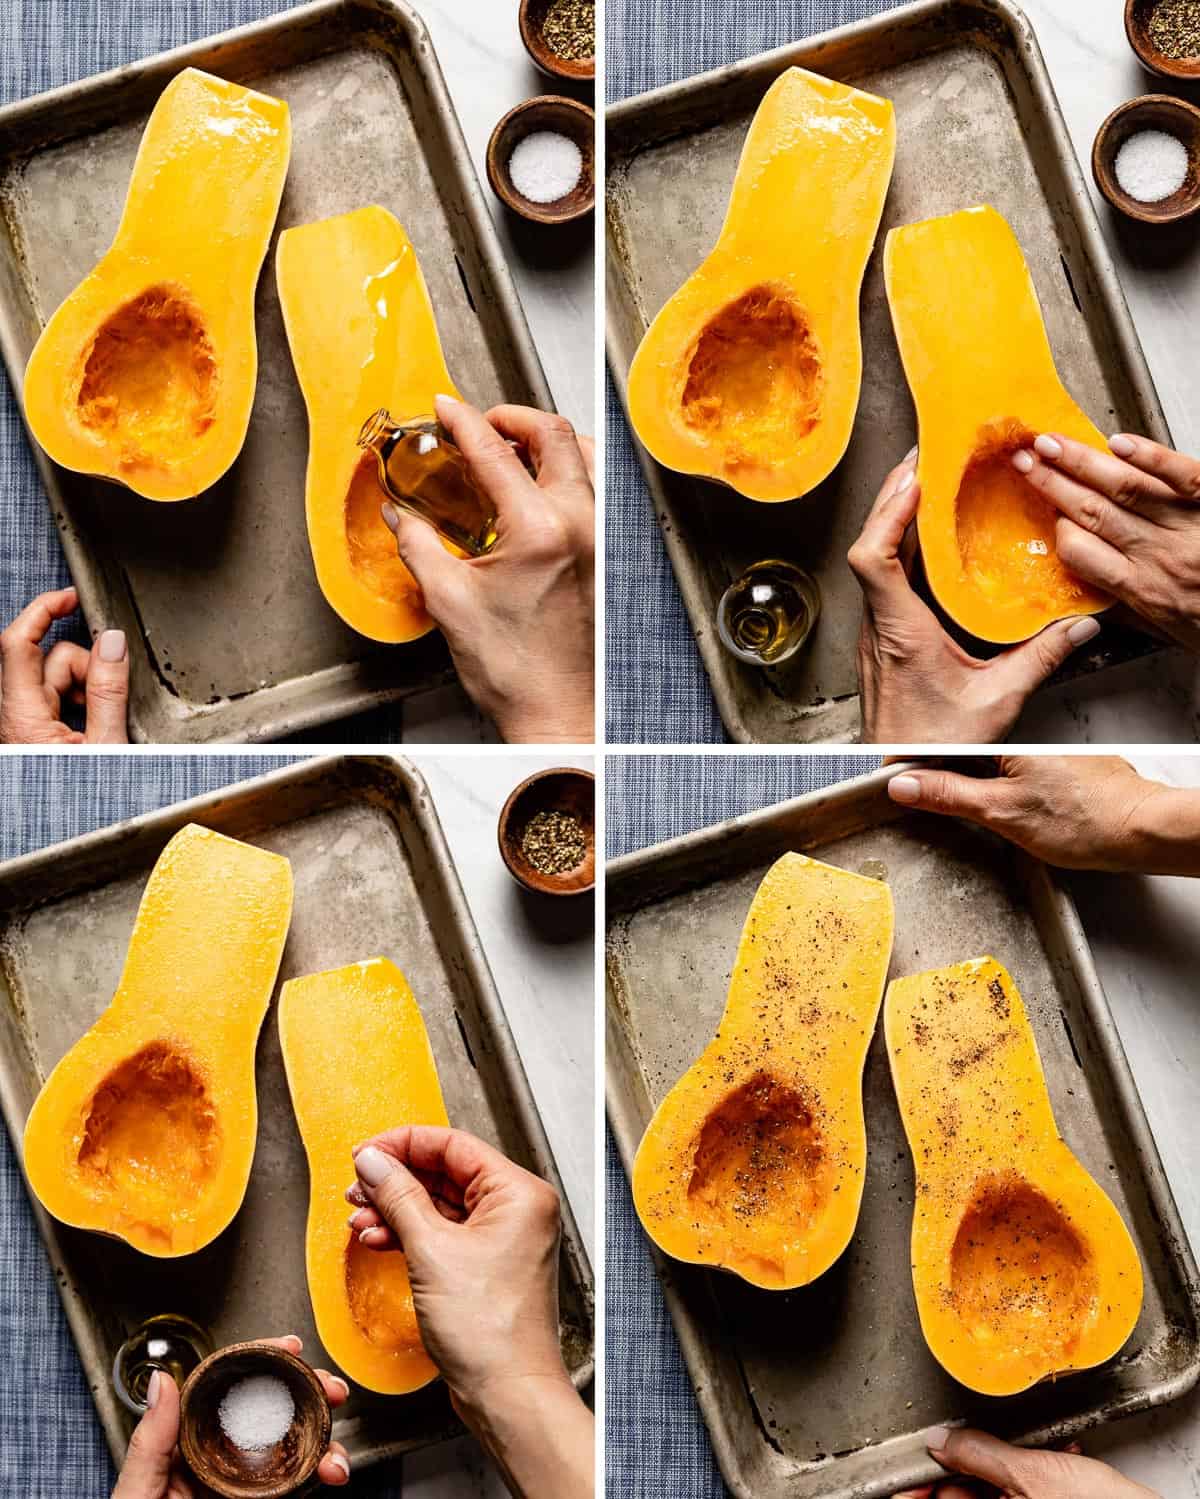 Photos showing how to roast butternut squash halves